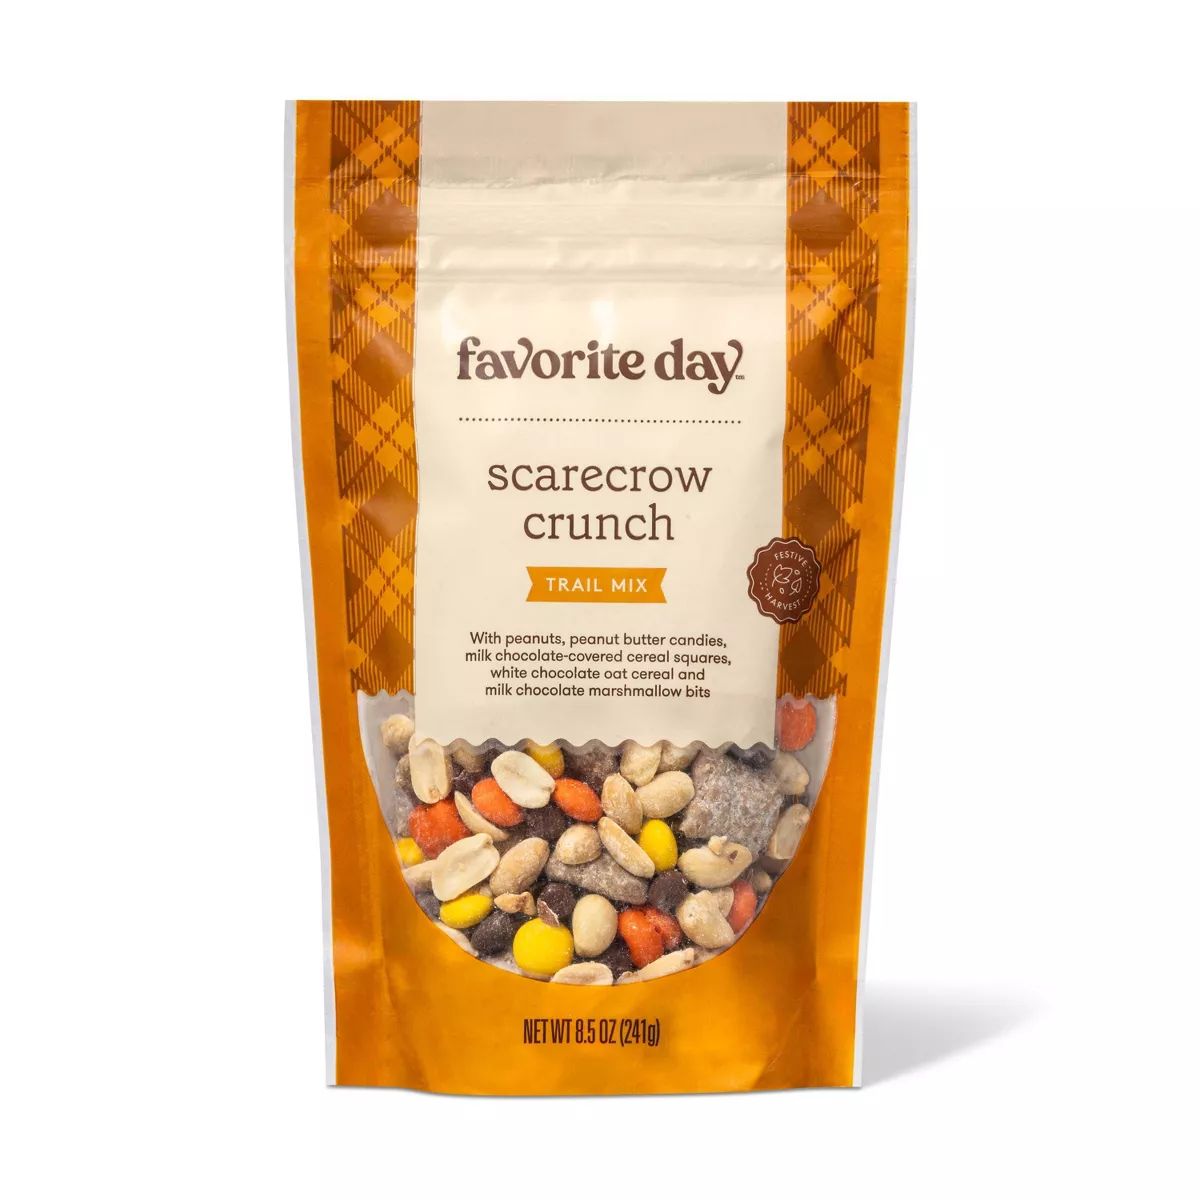 Scarecrow Crunch Trail Mix - 8.5oz - Favorite Day™ | Target